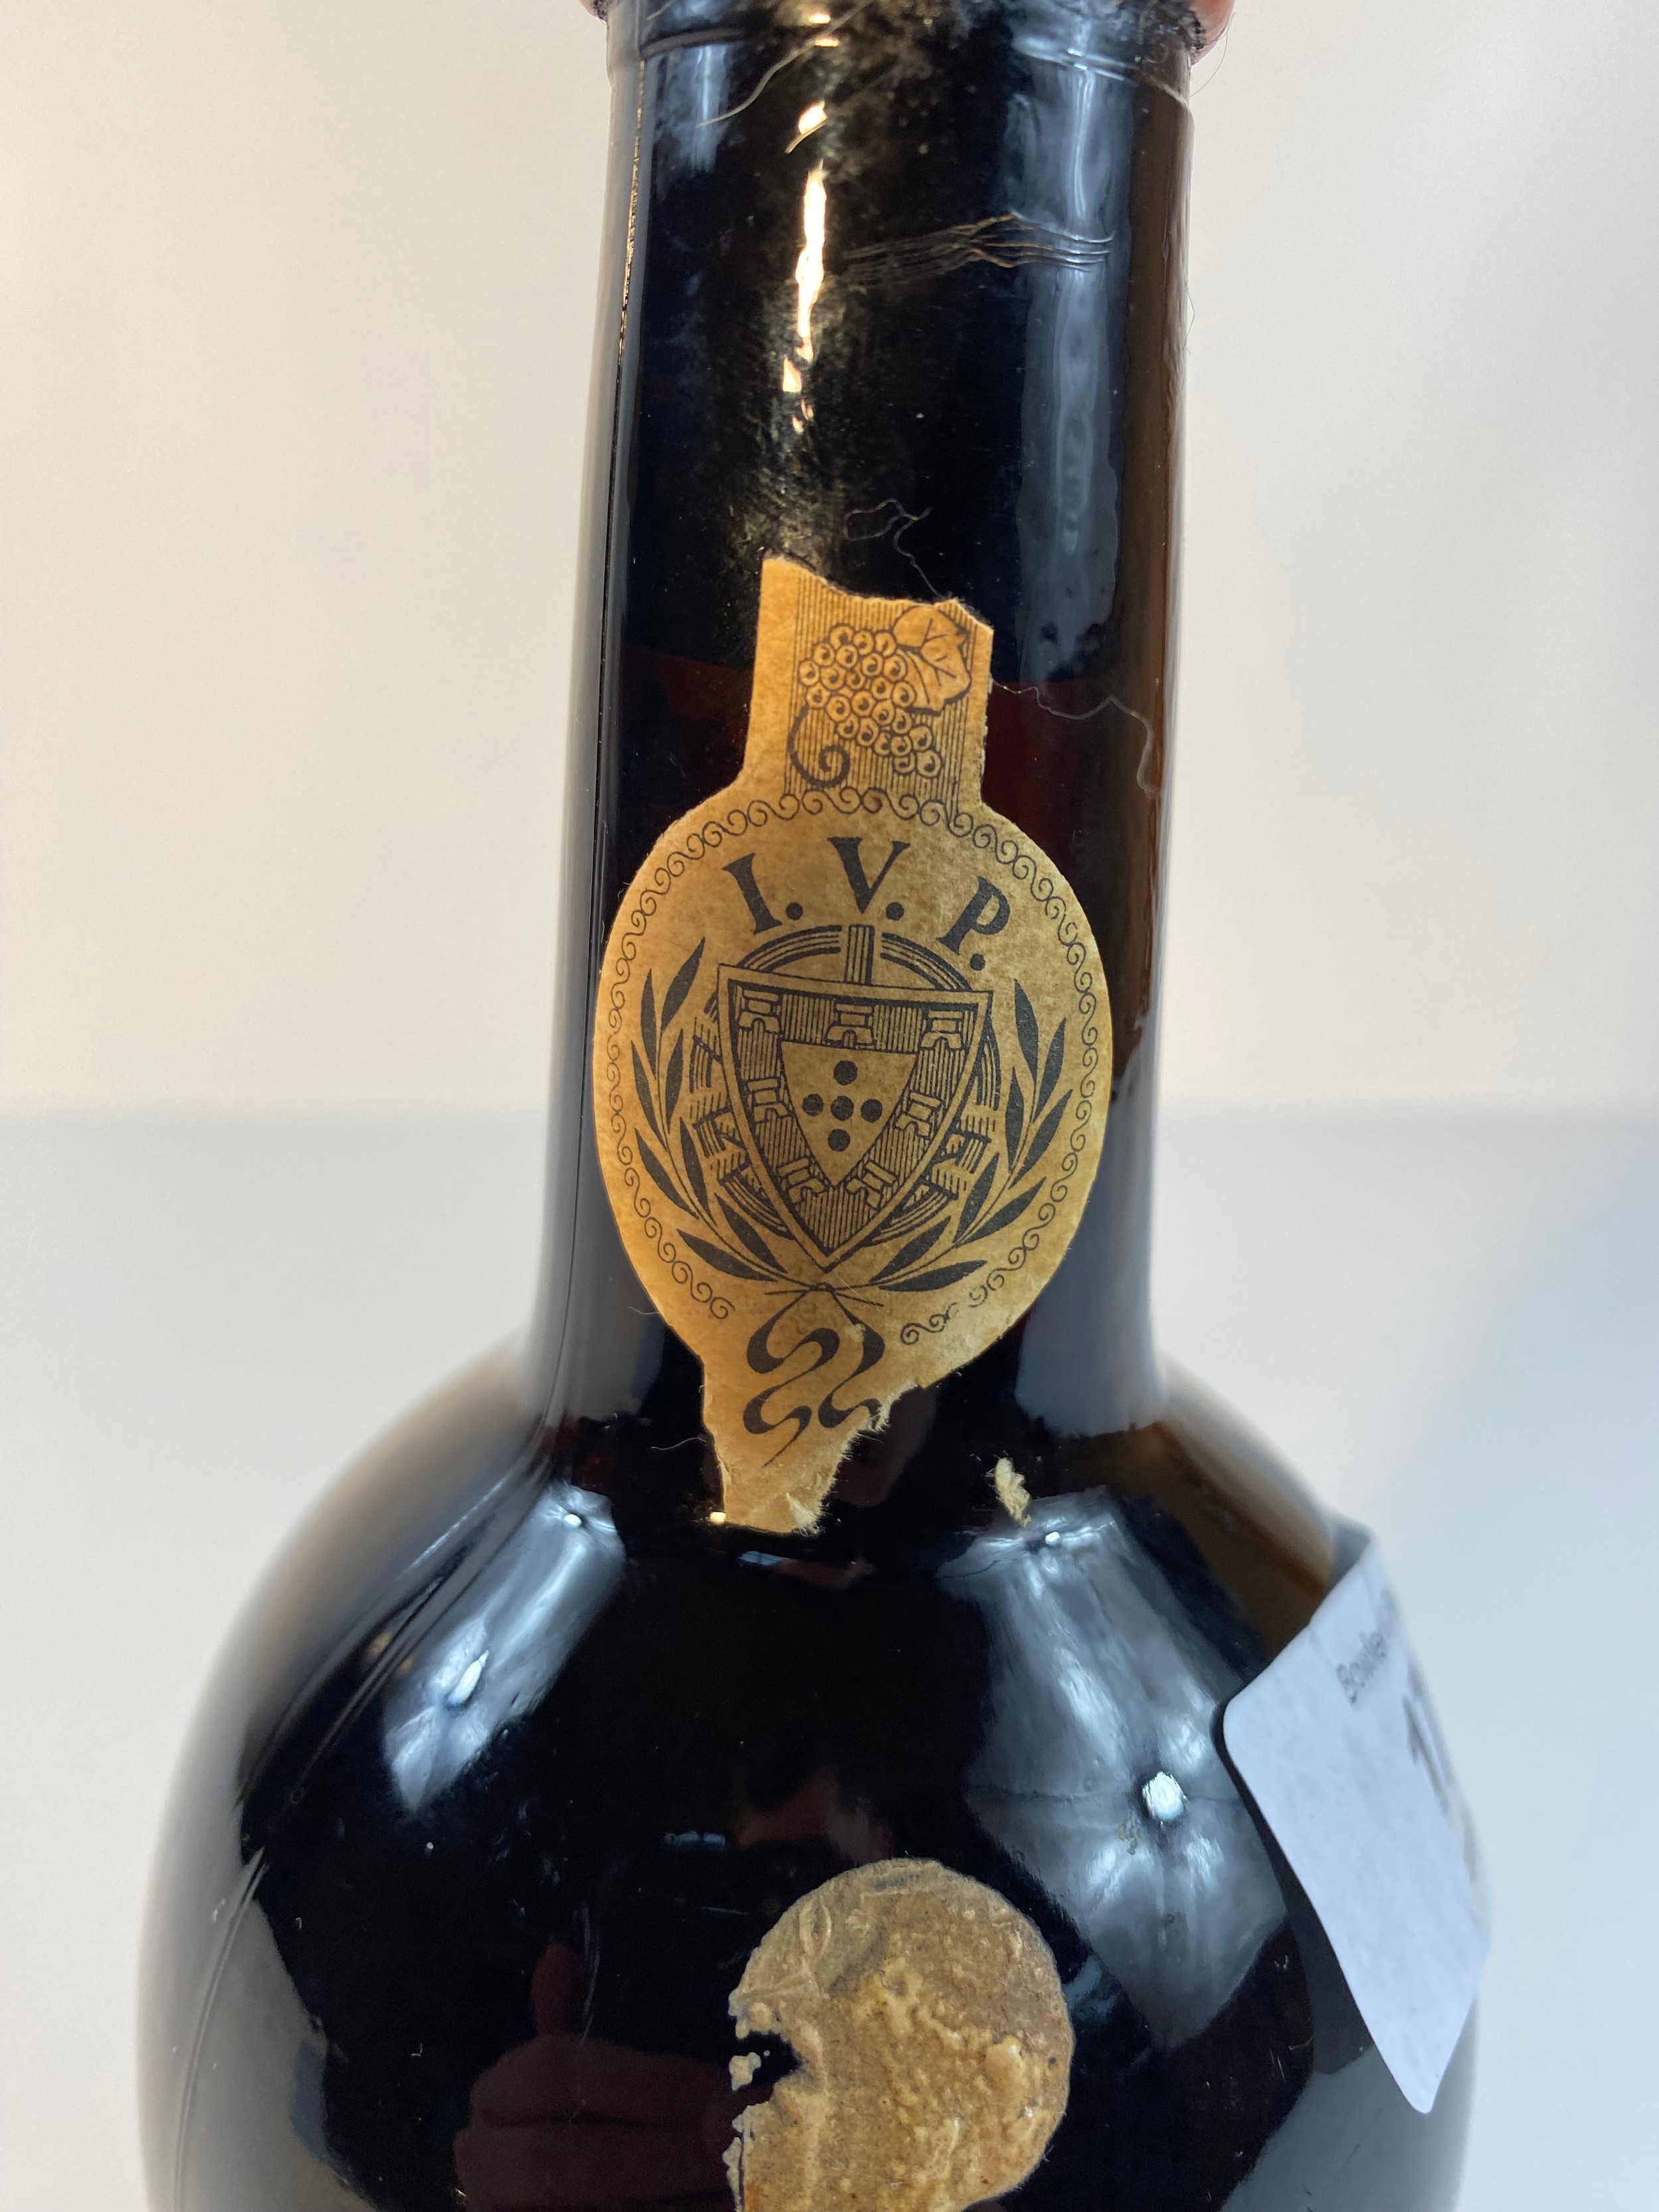 W & J Graham & co crusted port wine dated 1957-1959 - Image 4 of 5